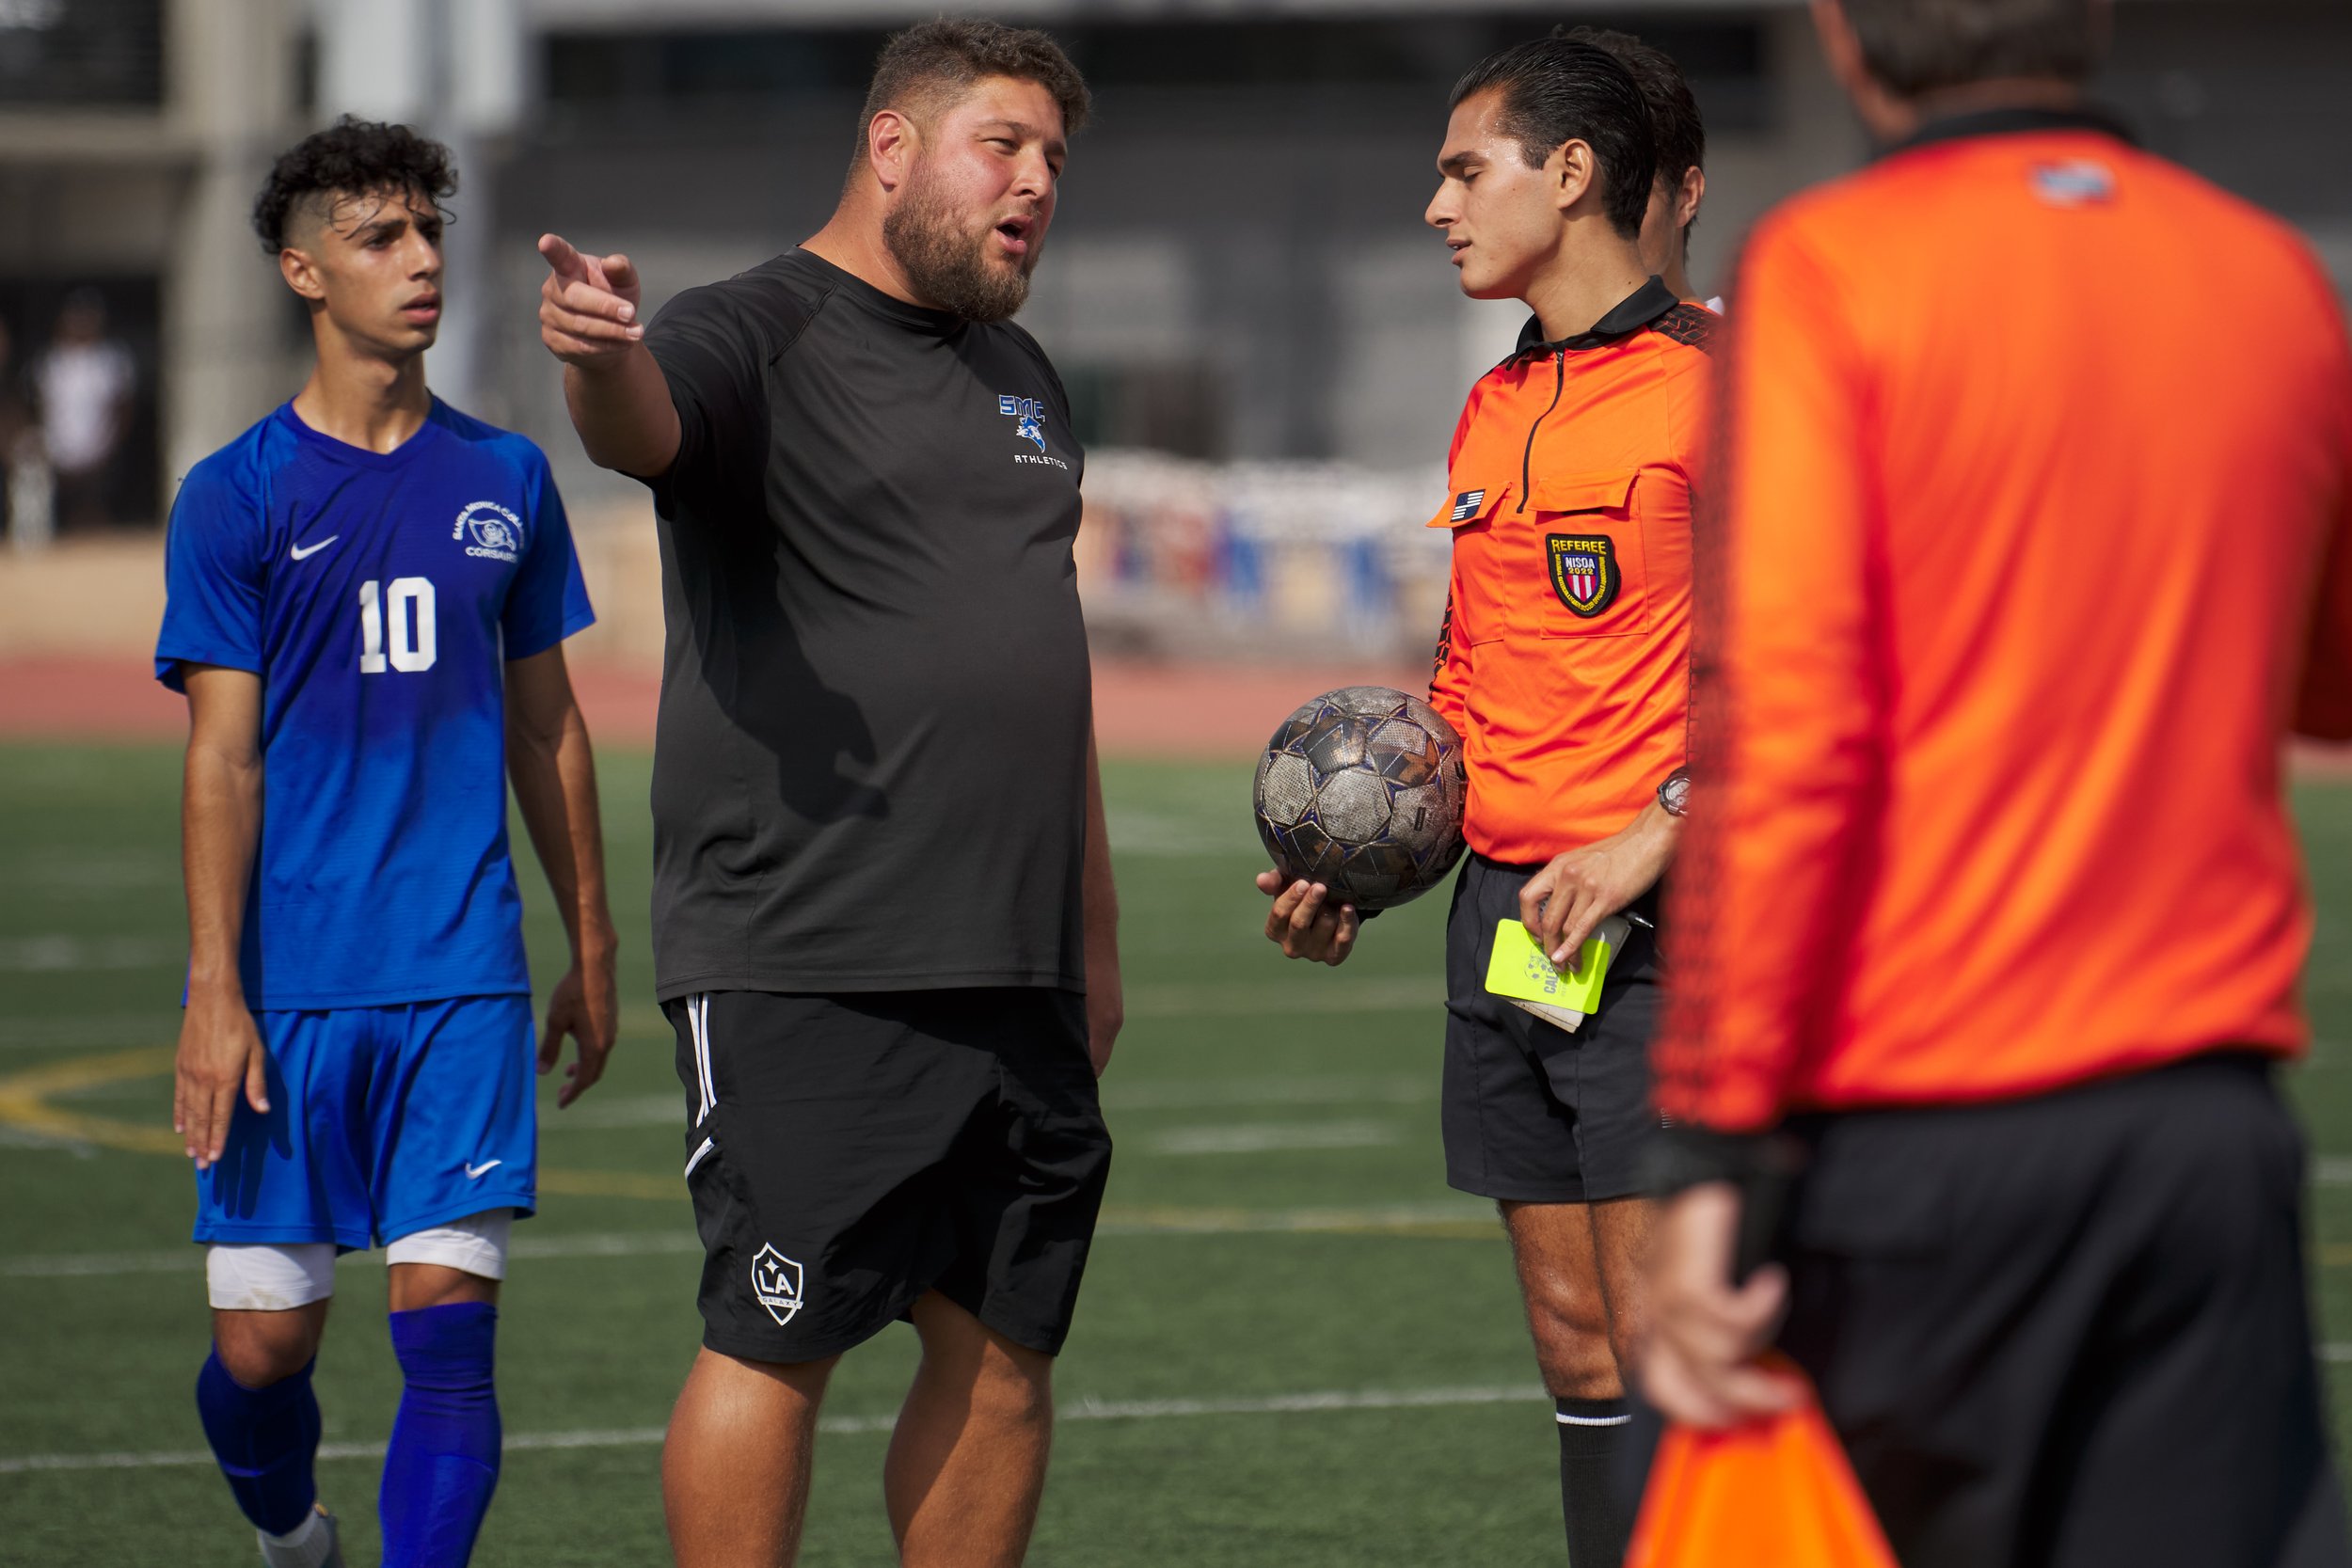  Santa Monica College Corsairs Men's Soccer Assistant Coach Rick Minars (center), with Roey Kivity (left), complains to the referee about the Los Angeles Mission College Eagles' aggressive behavior during the men's soccer match on Tuesday, Nov. 1, 20